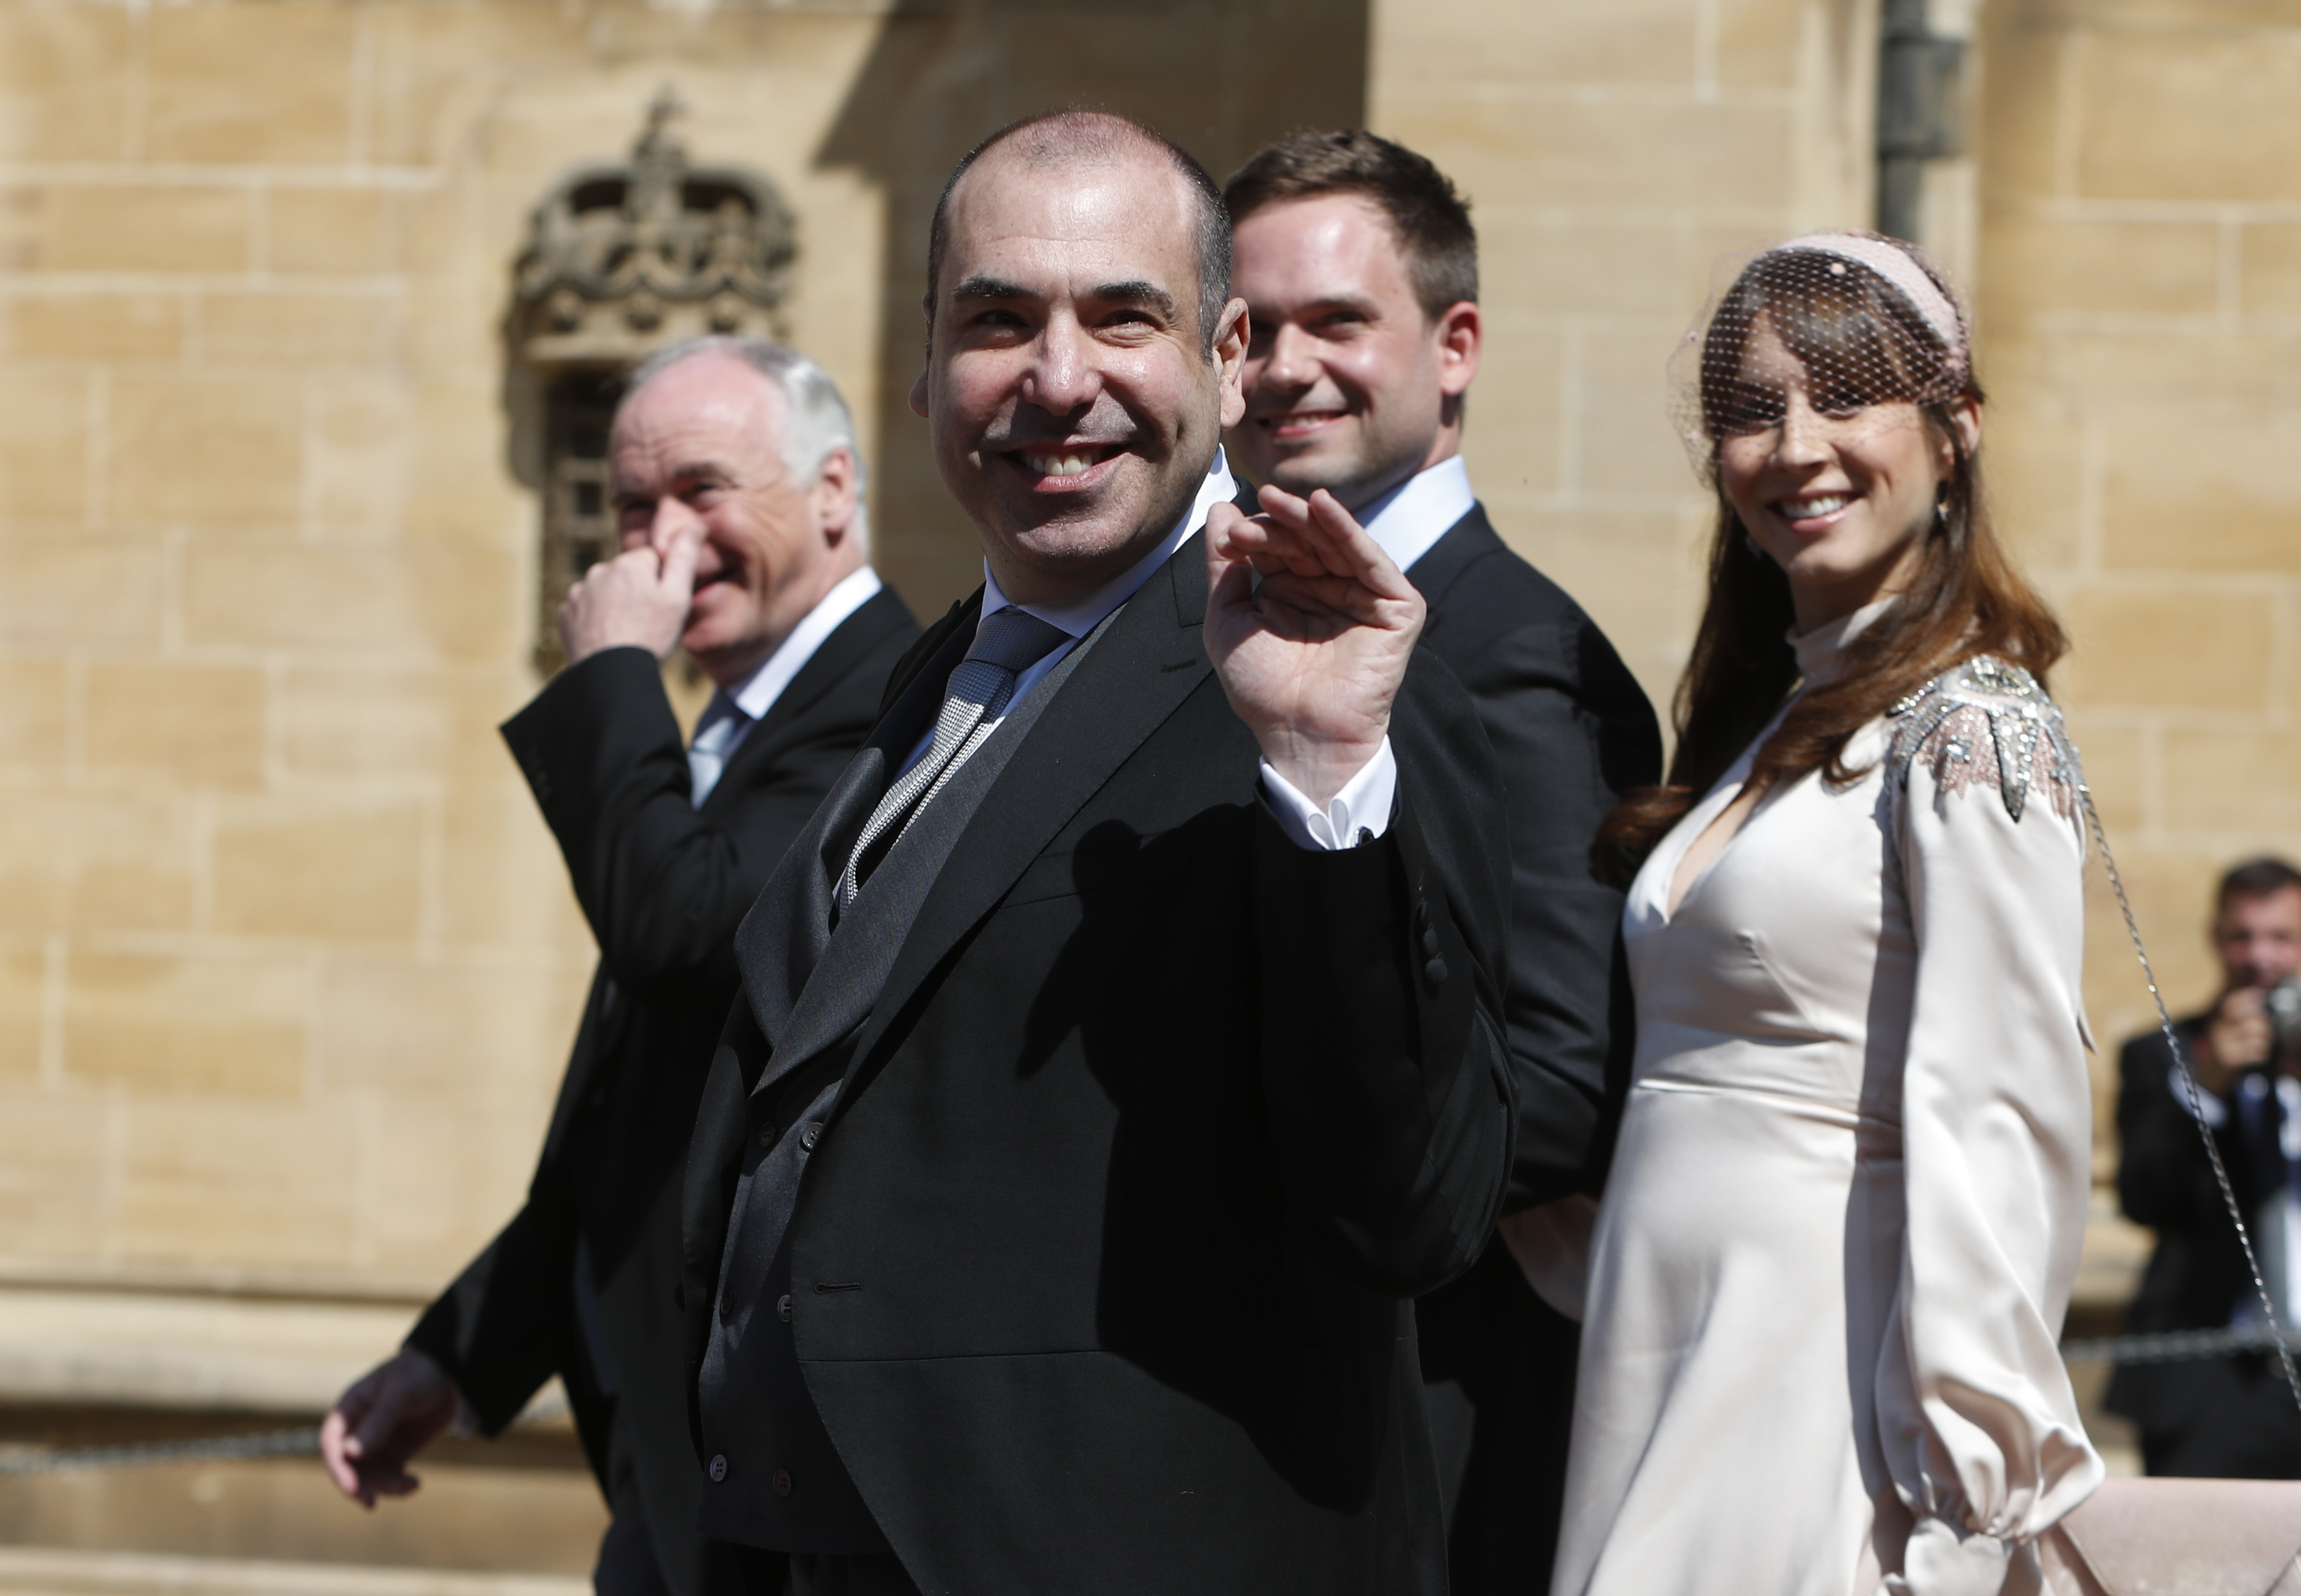 Rick Hoffman waves as he arrives for the wedding ceremony of Prince Harry and Meghan Markle at St George's Chapel, Windsor Castle, in Windsor, on May 19, 2018. | Source: Getty Images